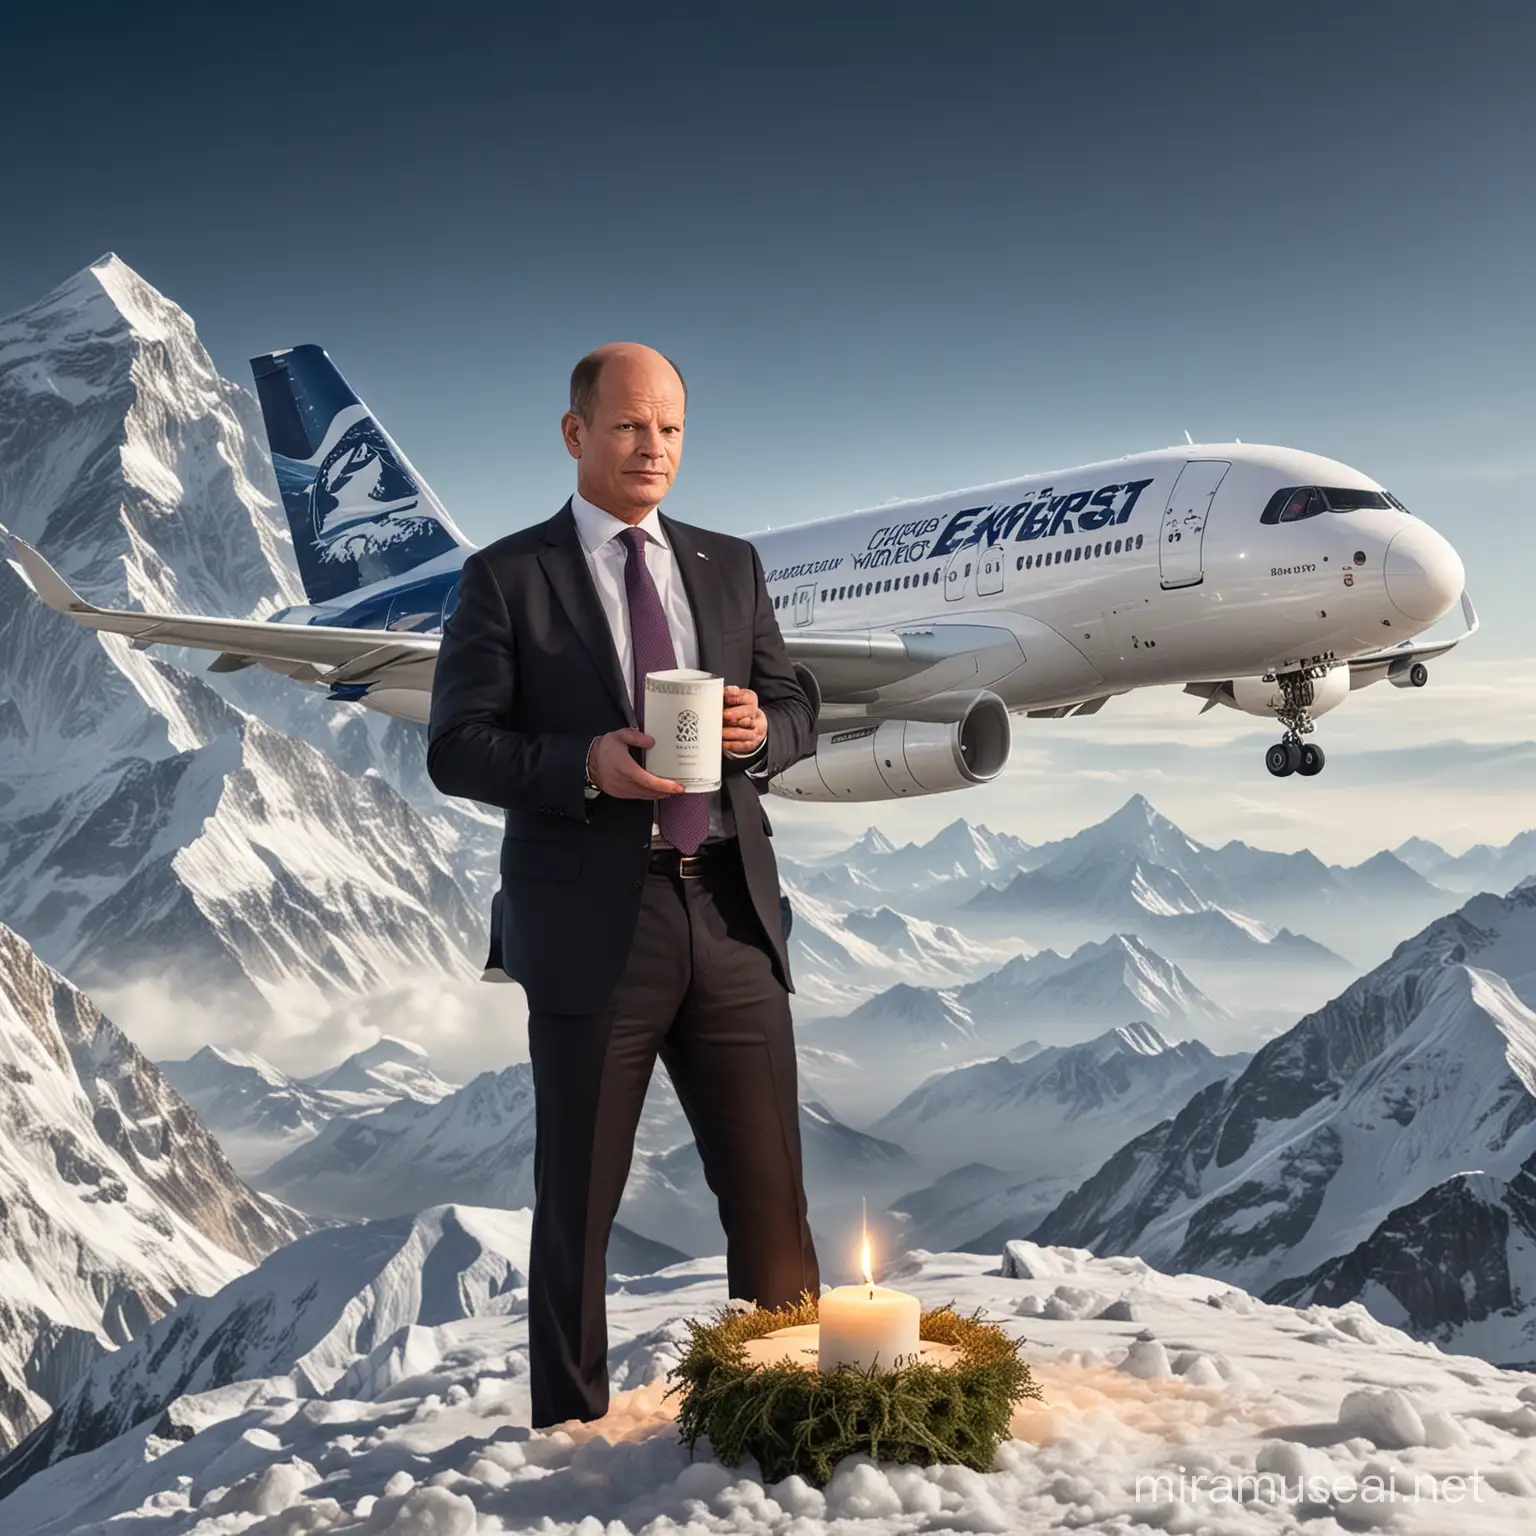 Supersonic Airbus Soaring Past Mount Everest Amidst Hemp Fields with Olaf Scholz Pouring Candle